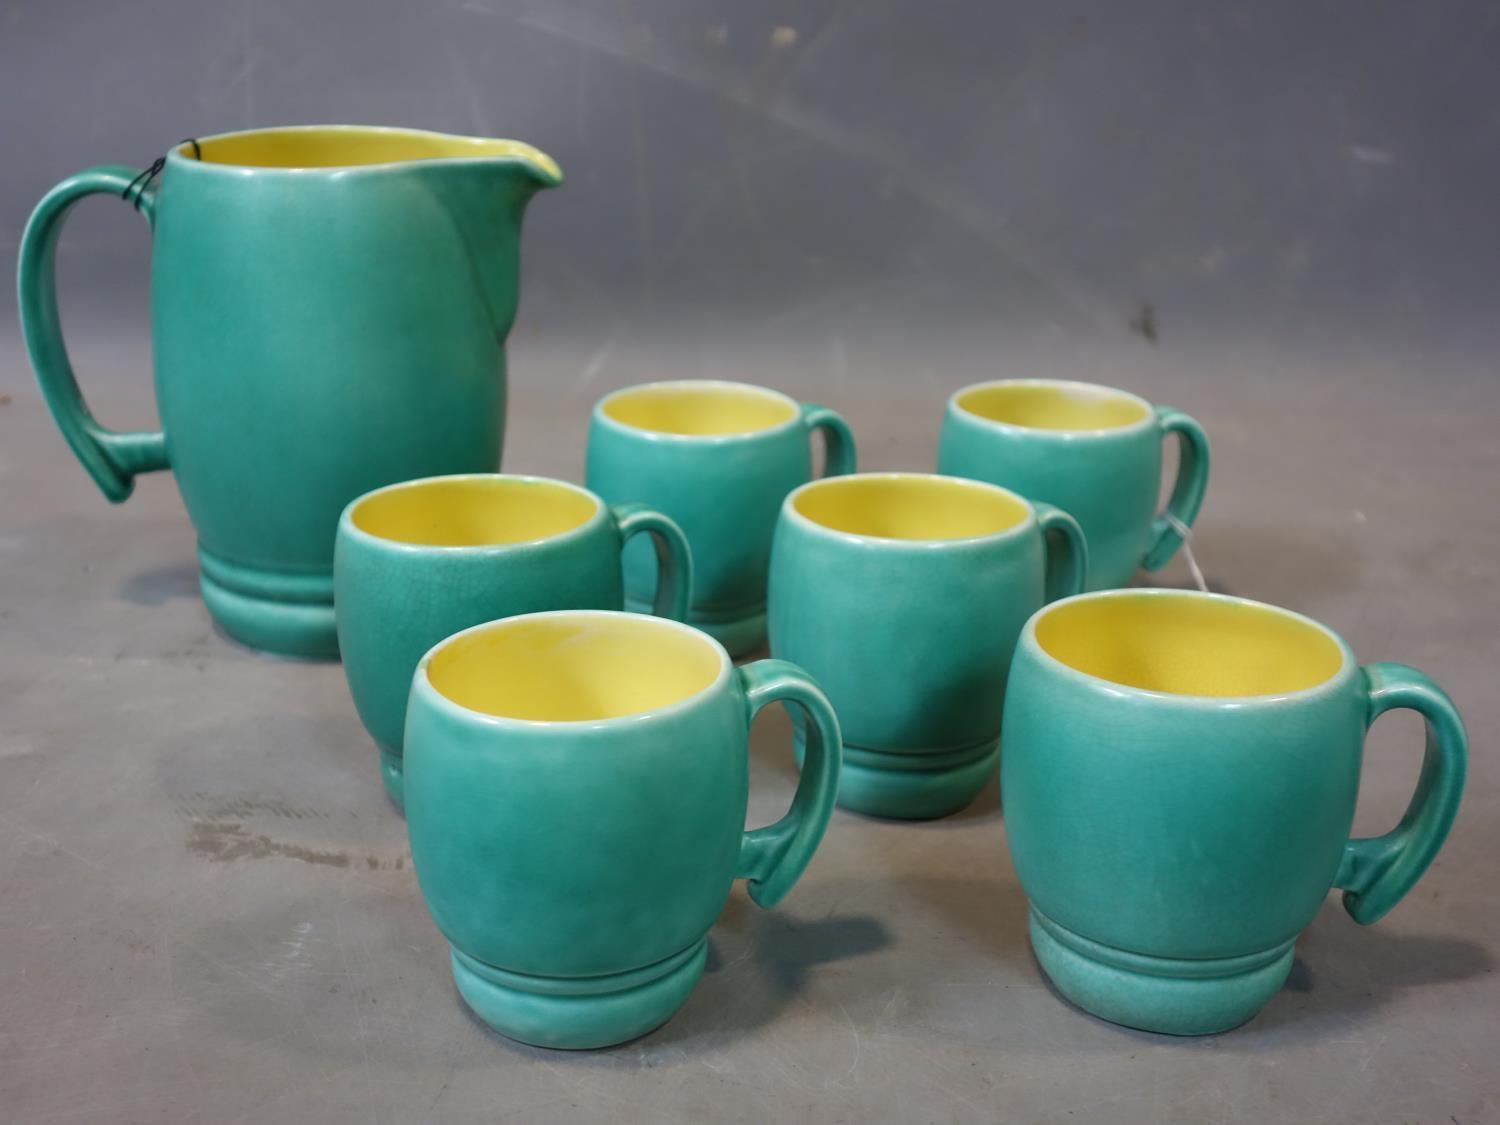 A set of 6 Bretby cups and the matching jug